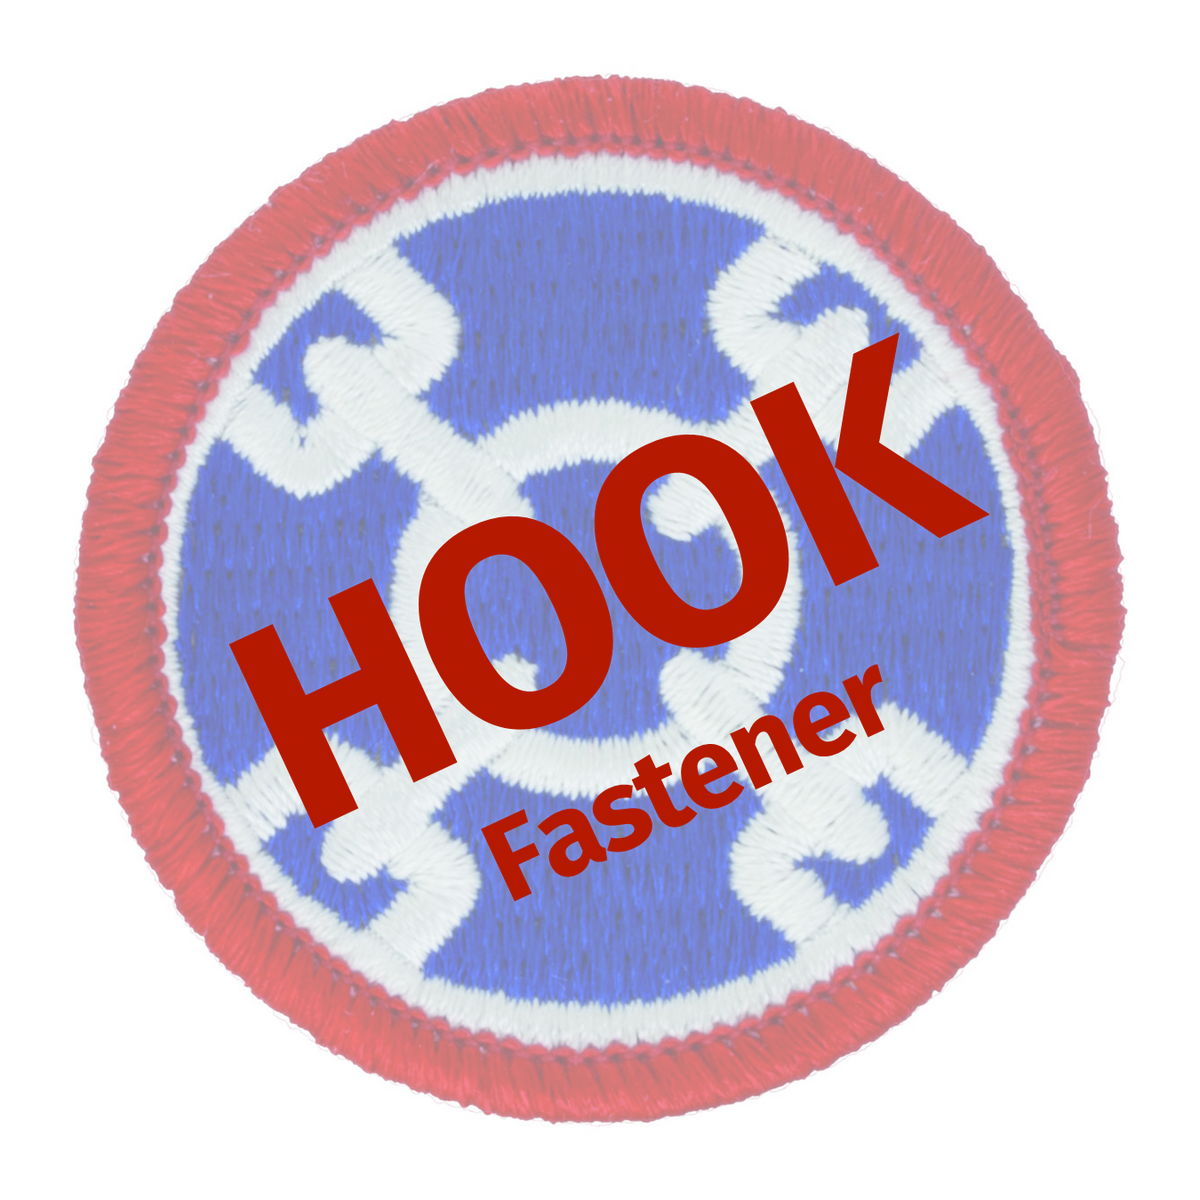 310th Support Command Patch - Full Color Dress Hook Fastener